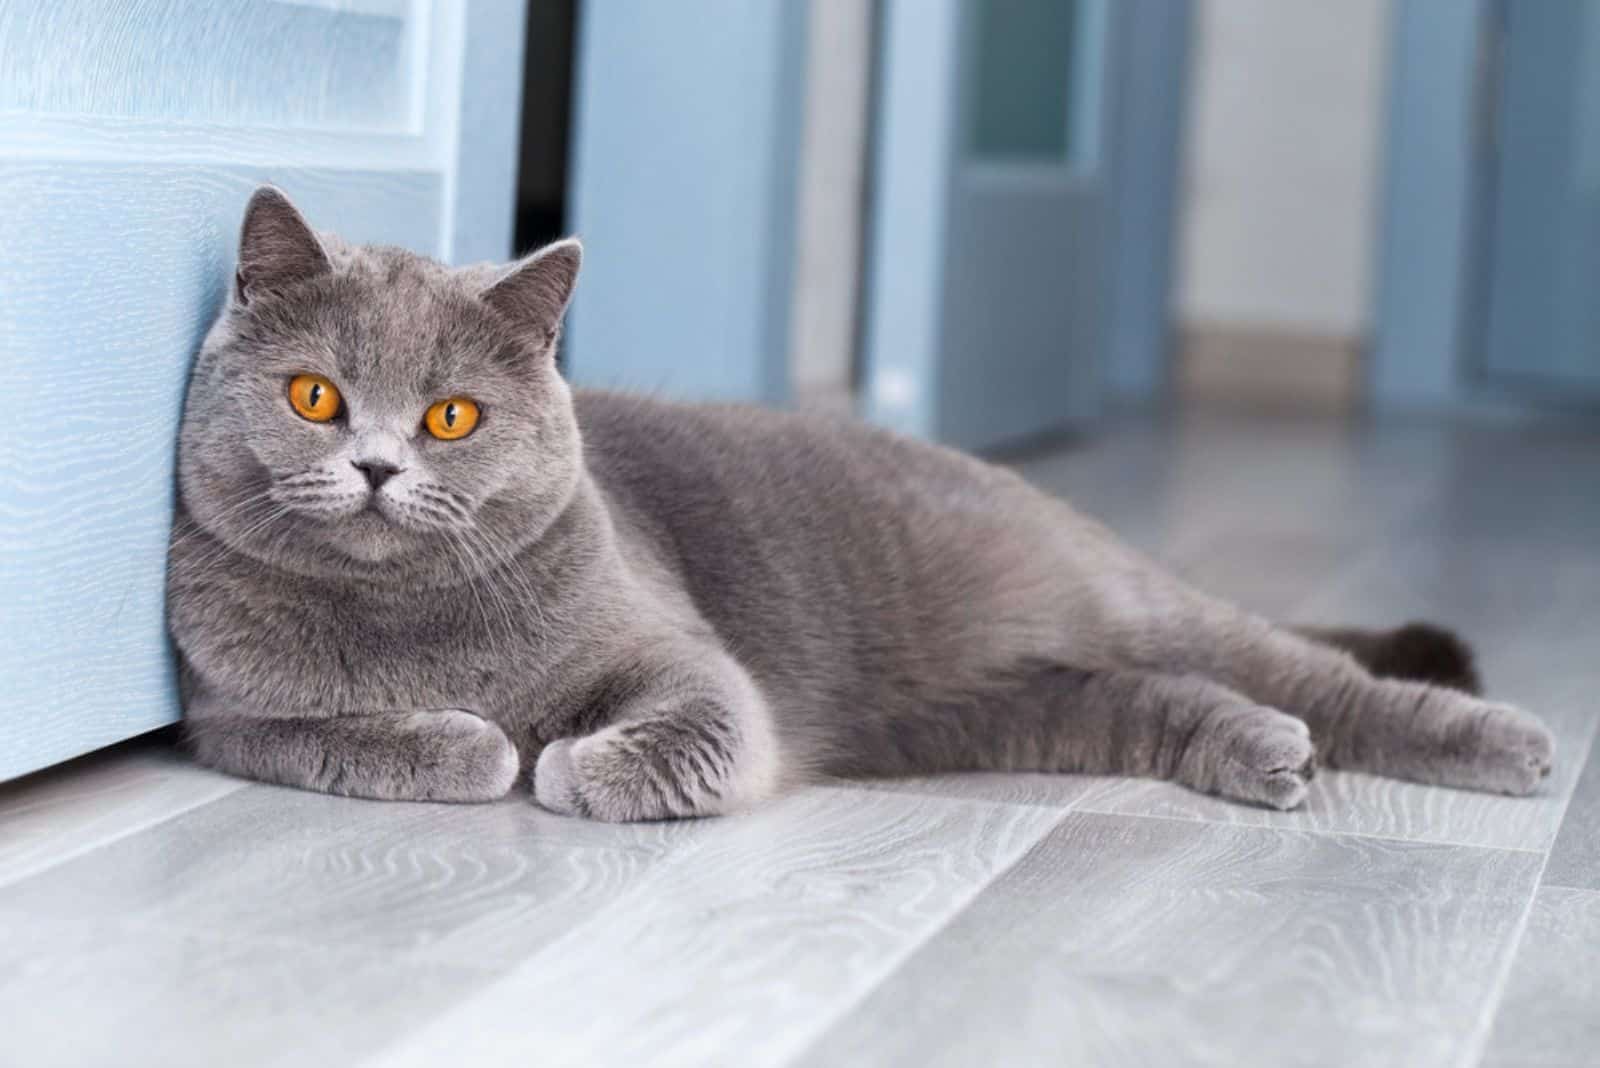 Shorthair cat with yellow eyes looking at the camera